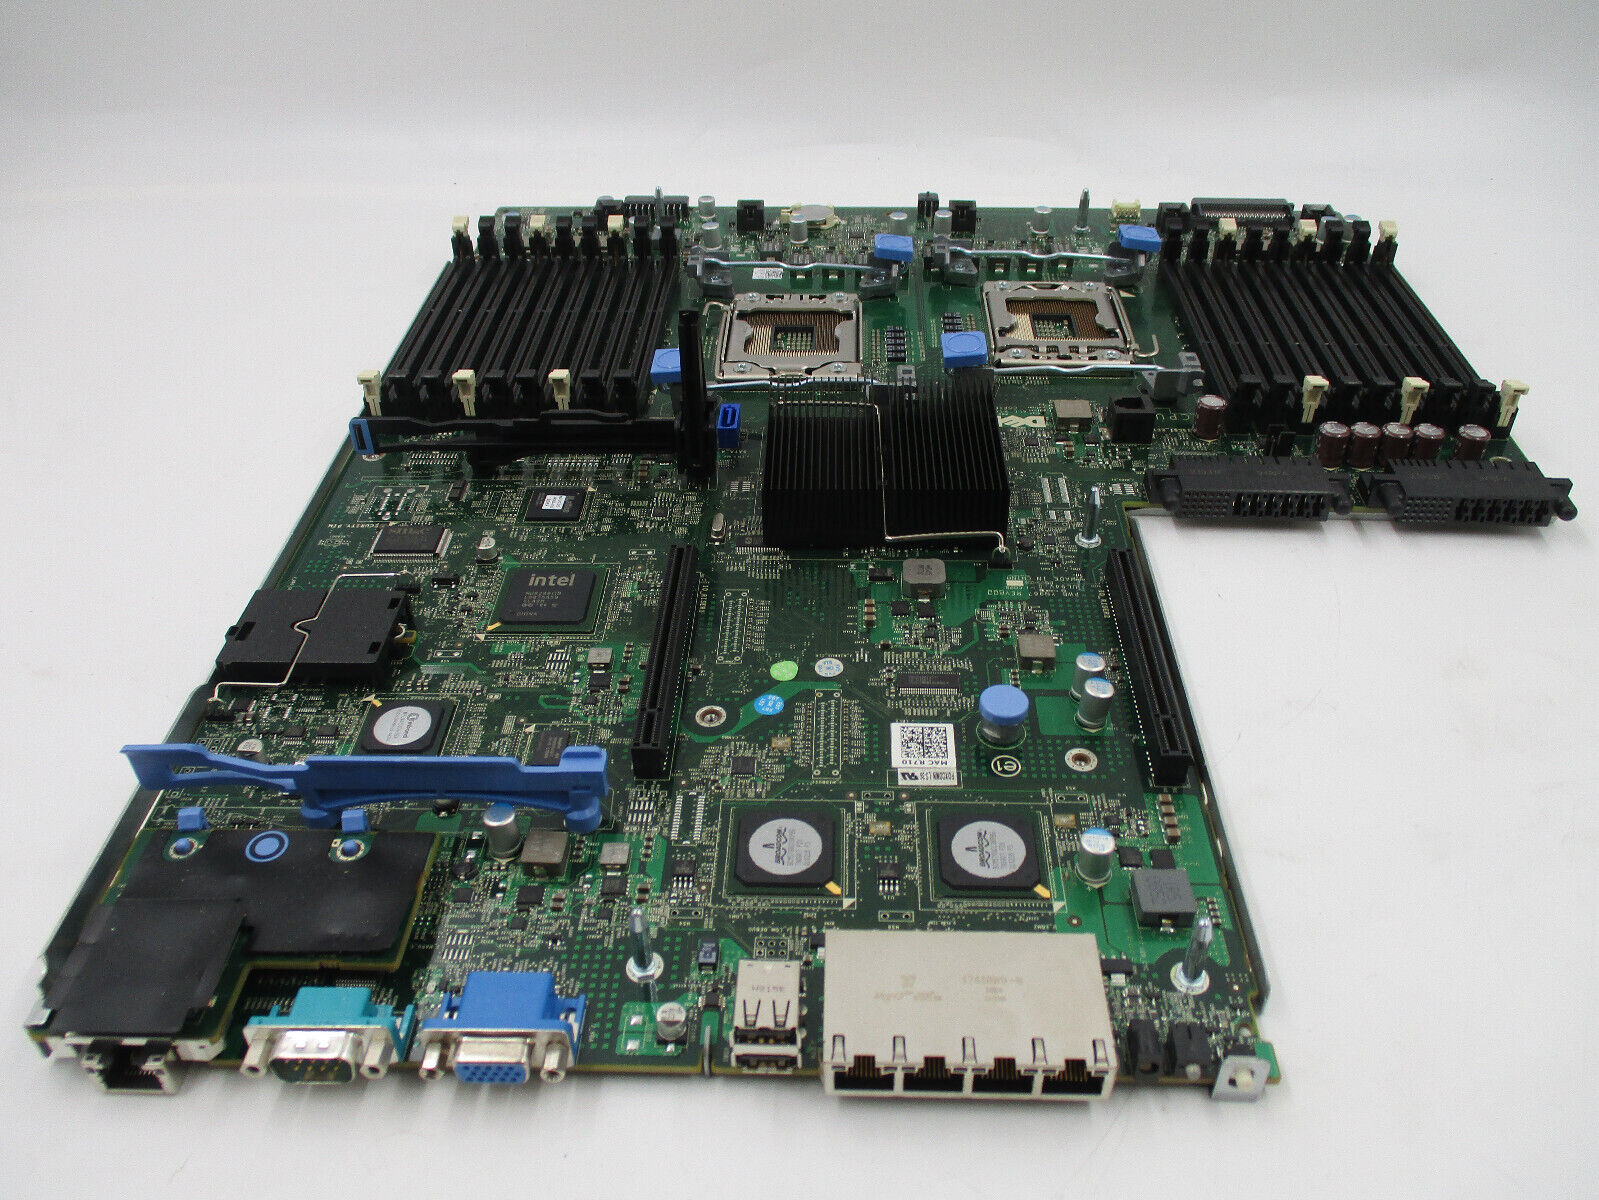 Dell PowerEdge R710 Dual LGA1366 CPU System Motherboard Dell P/N: 0M233H Tested